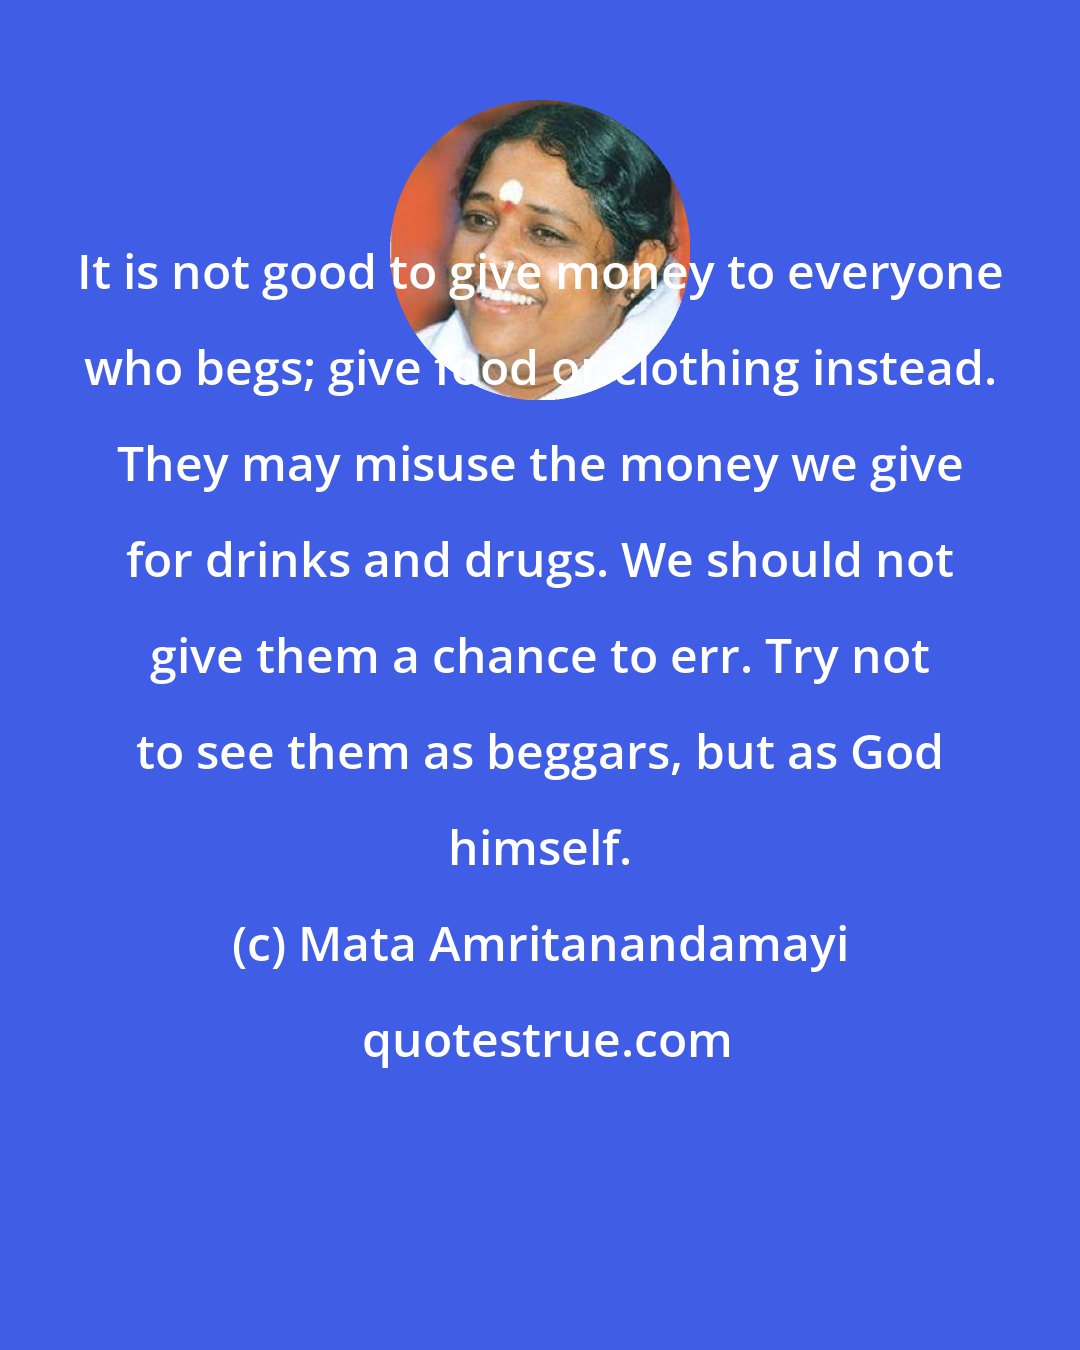 Mata Amritanandamayi: It is not good to give money to everyone who begs; give food or clothing instead. They may misuse the money we give for drinks and drugs. We should not give them a chance to err. Try not to see them as beggars, but as God himself.